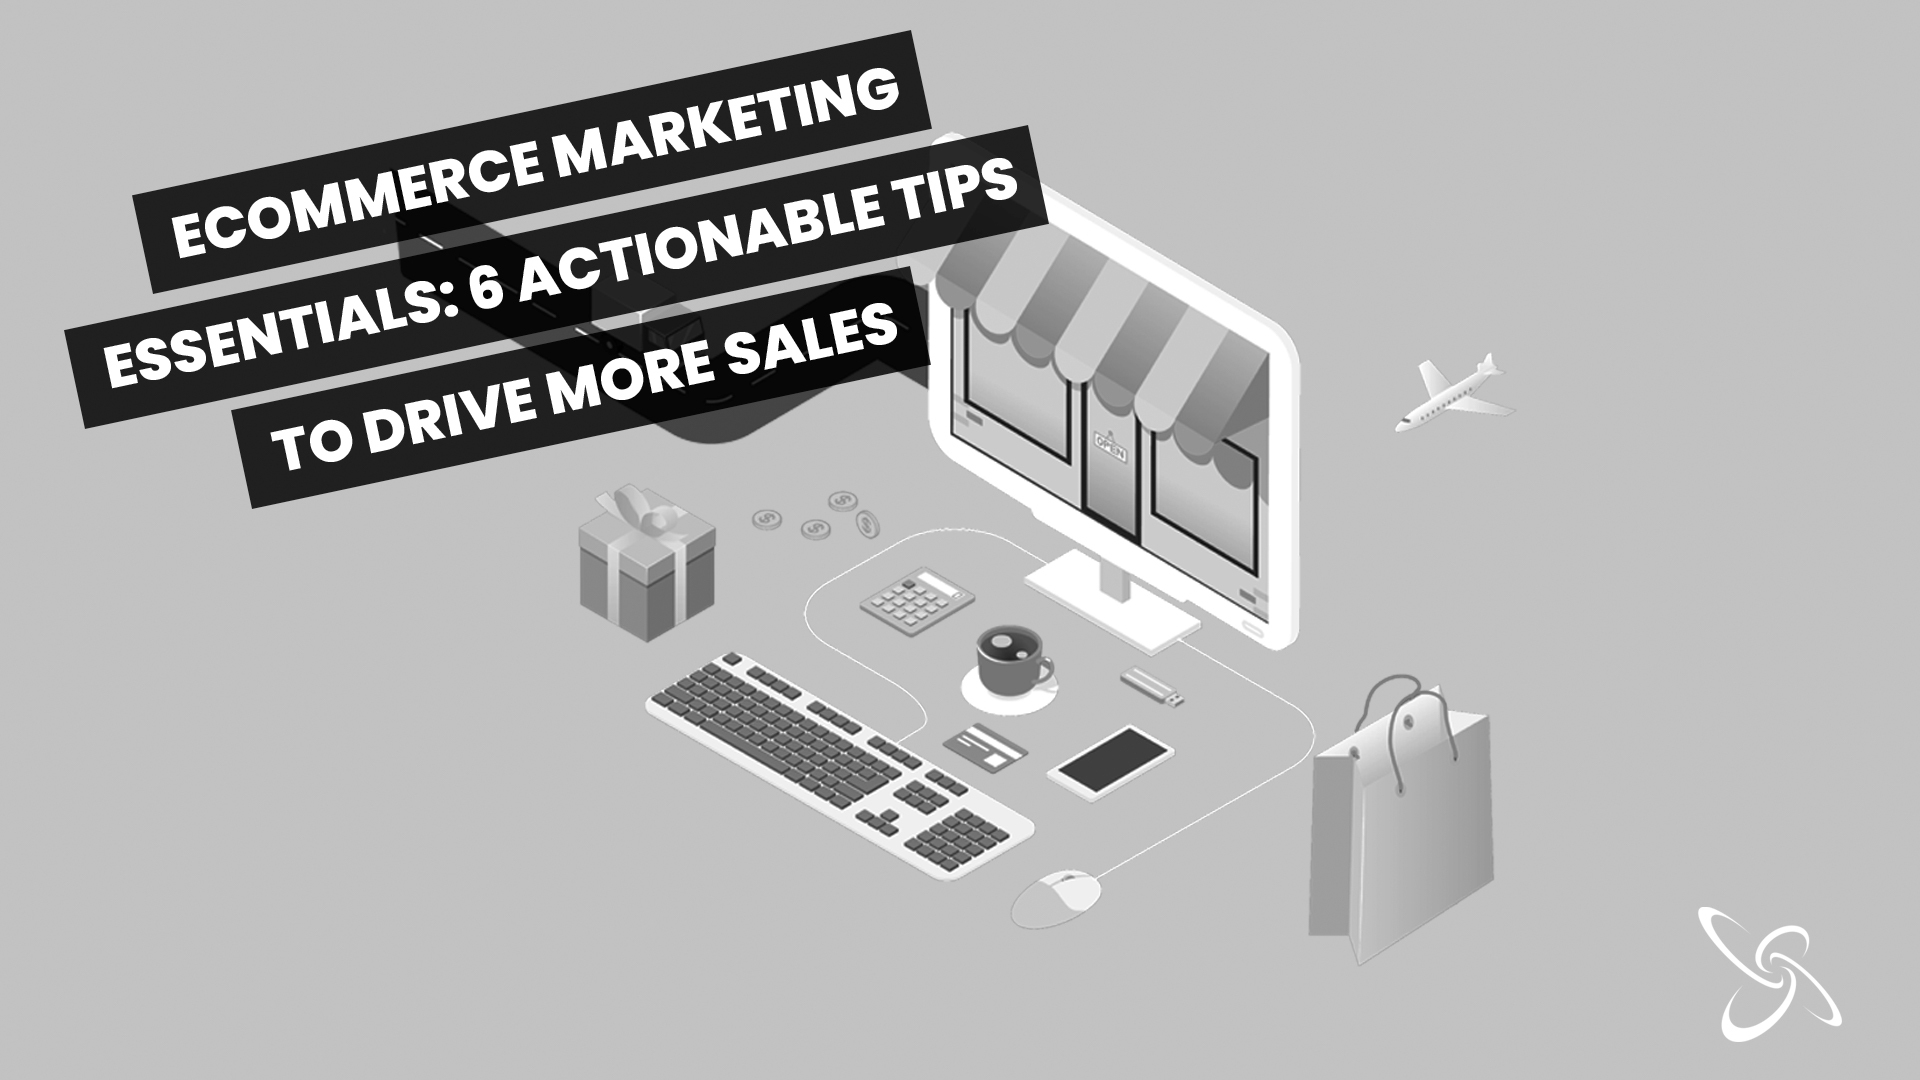 e-commerce marketing essentials: 6 actionable tips to drive more sales